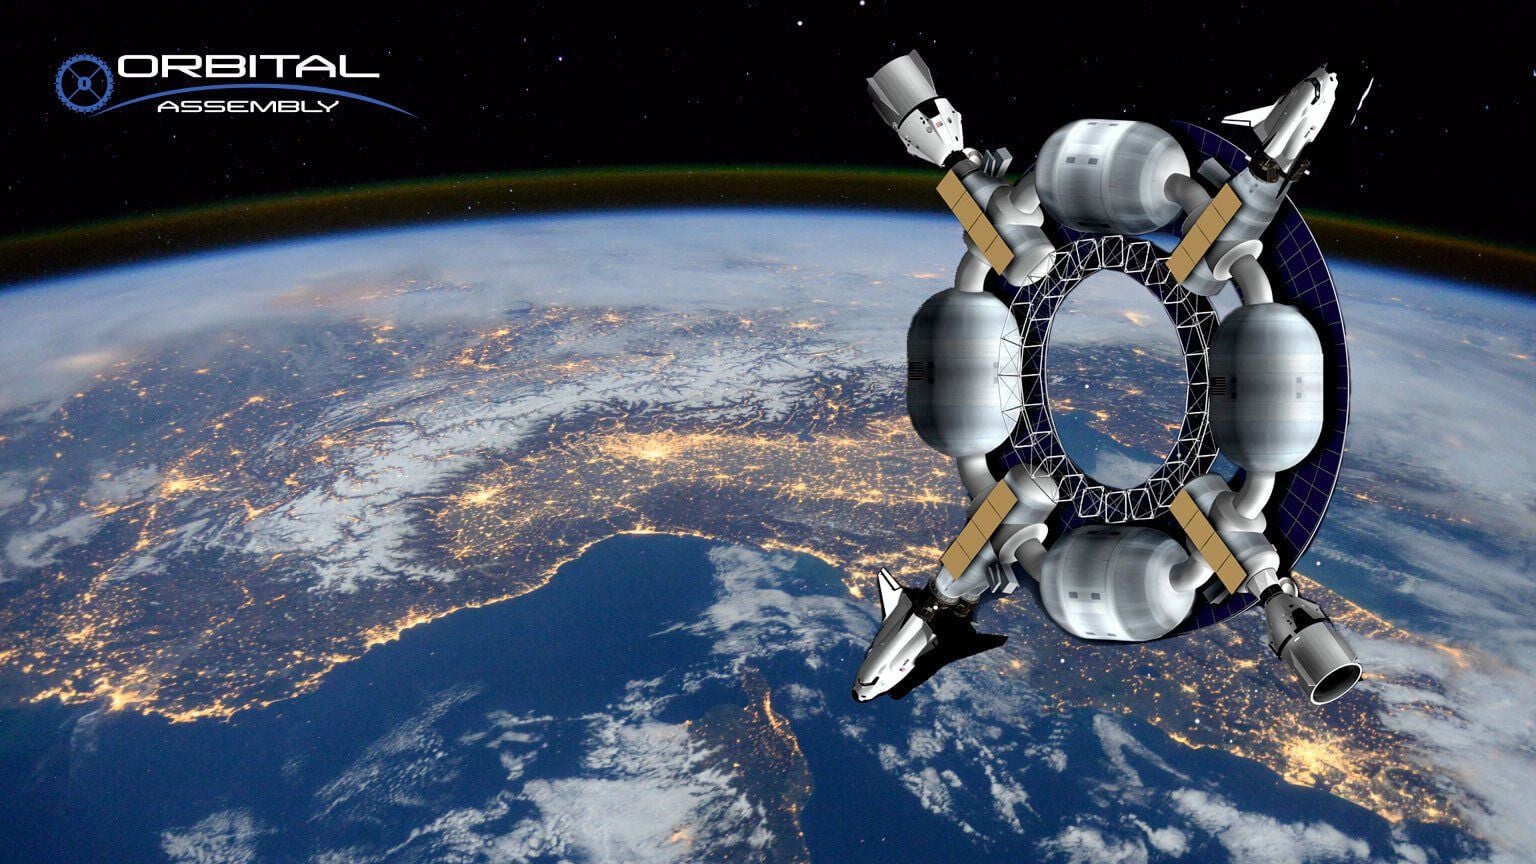 Need a Post-Pandemic Getaway" Check Out the Luxury Space Hotel Opening in 2025